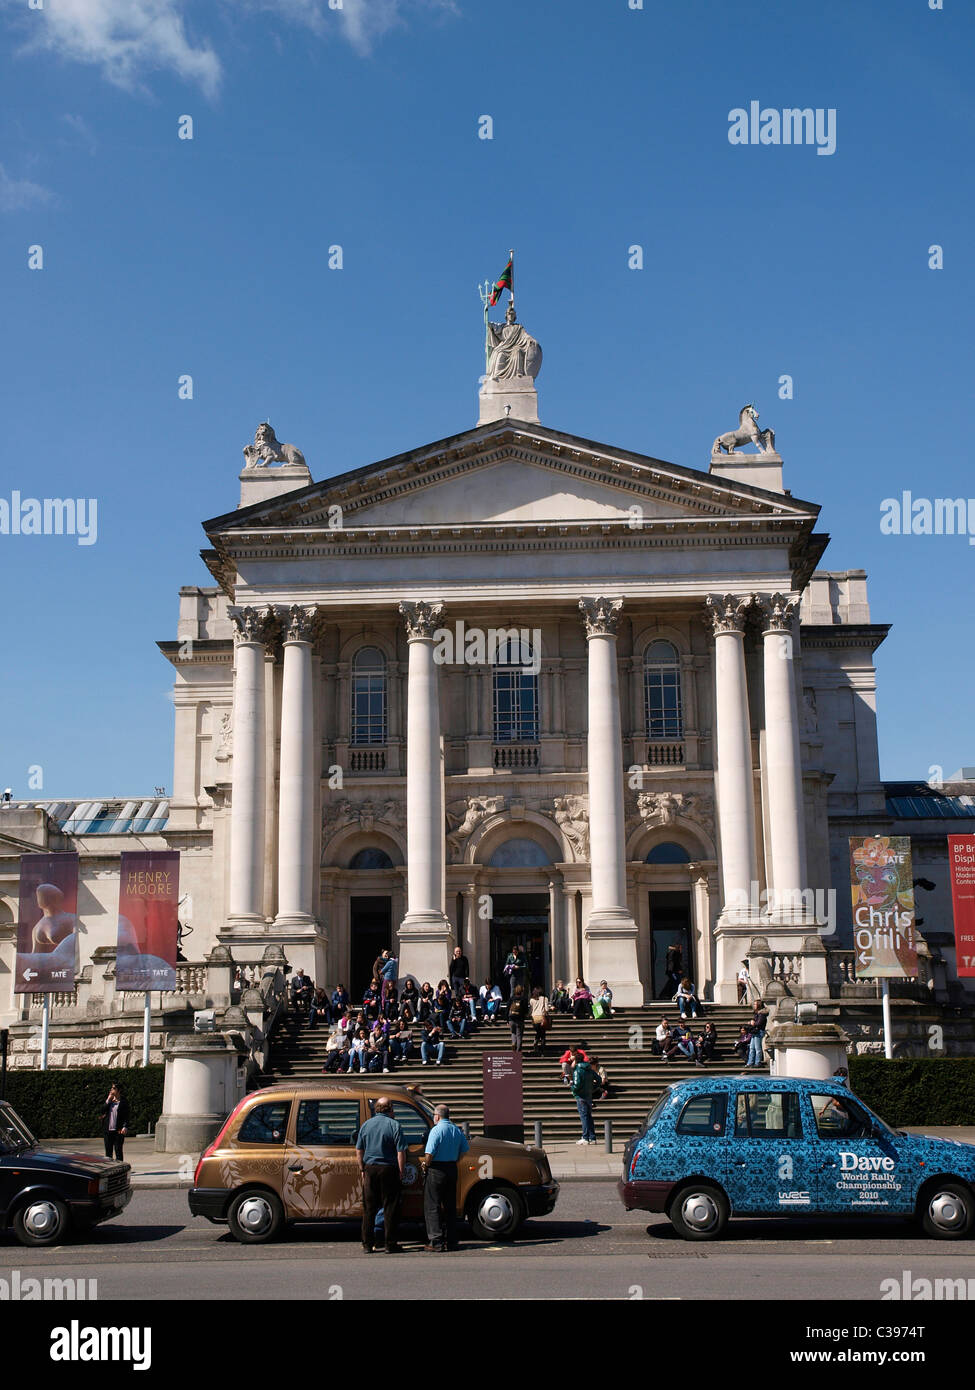 The Tate Britain art gallery for British art from 1500 to the present day. Millbank London England Stock Photo